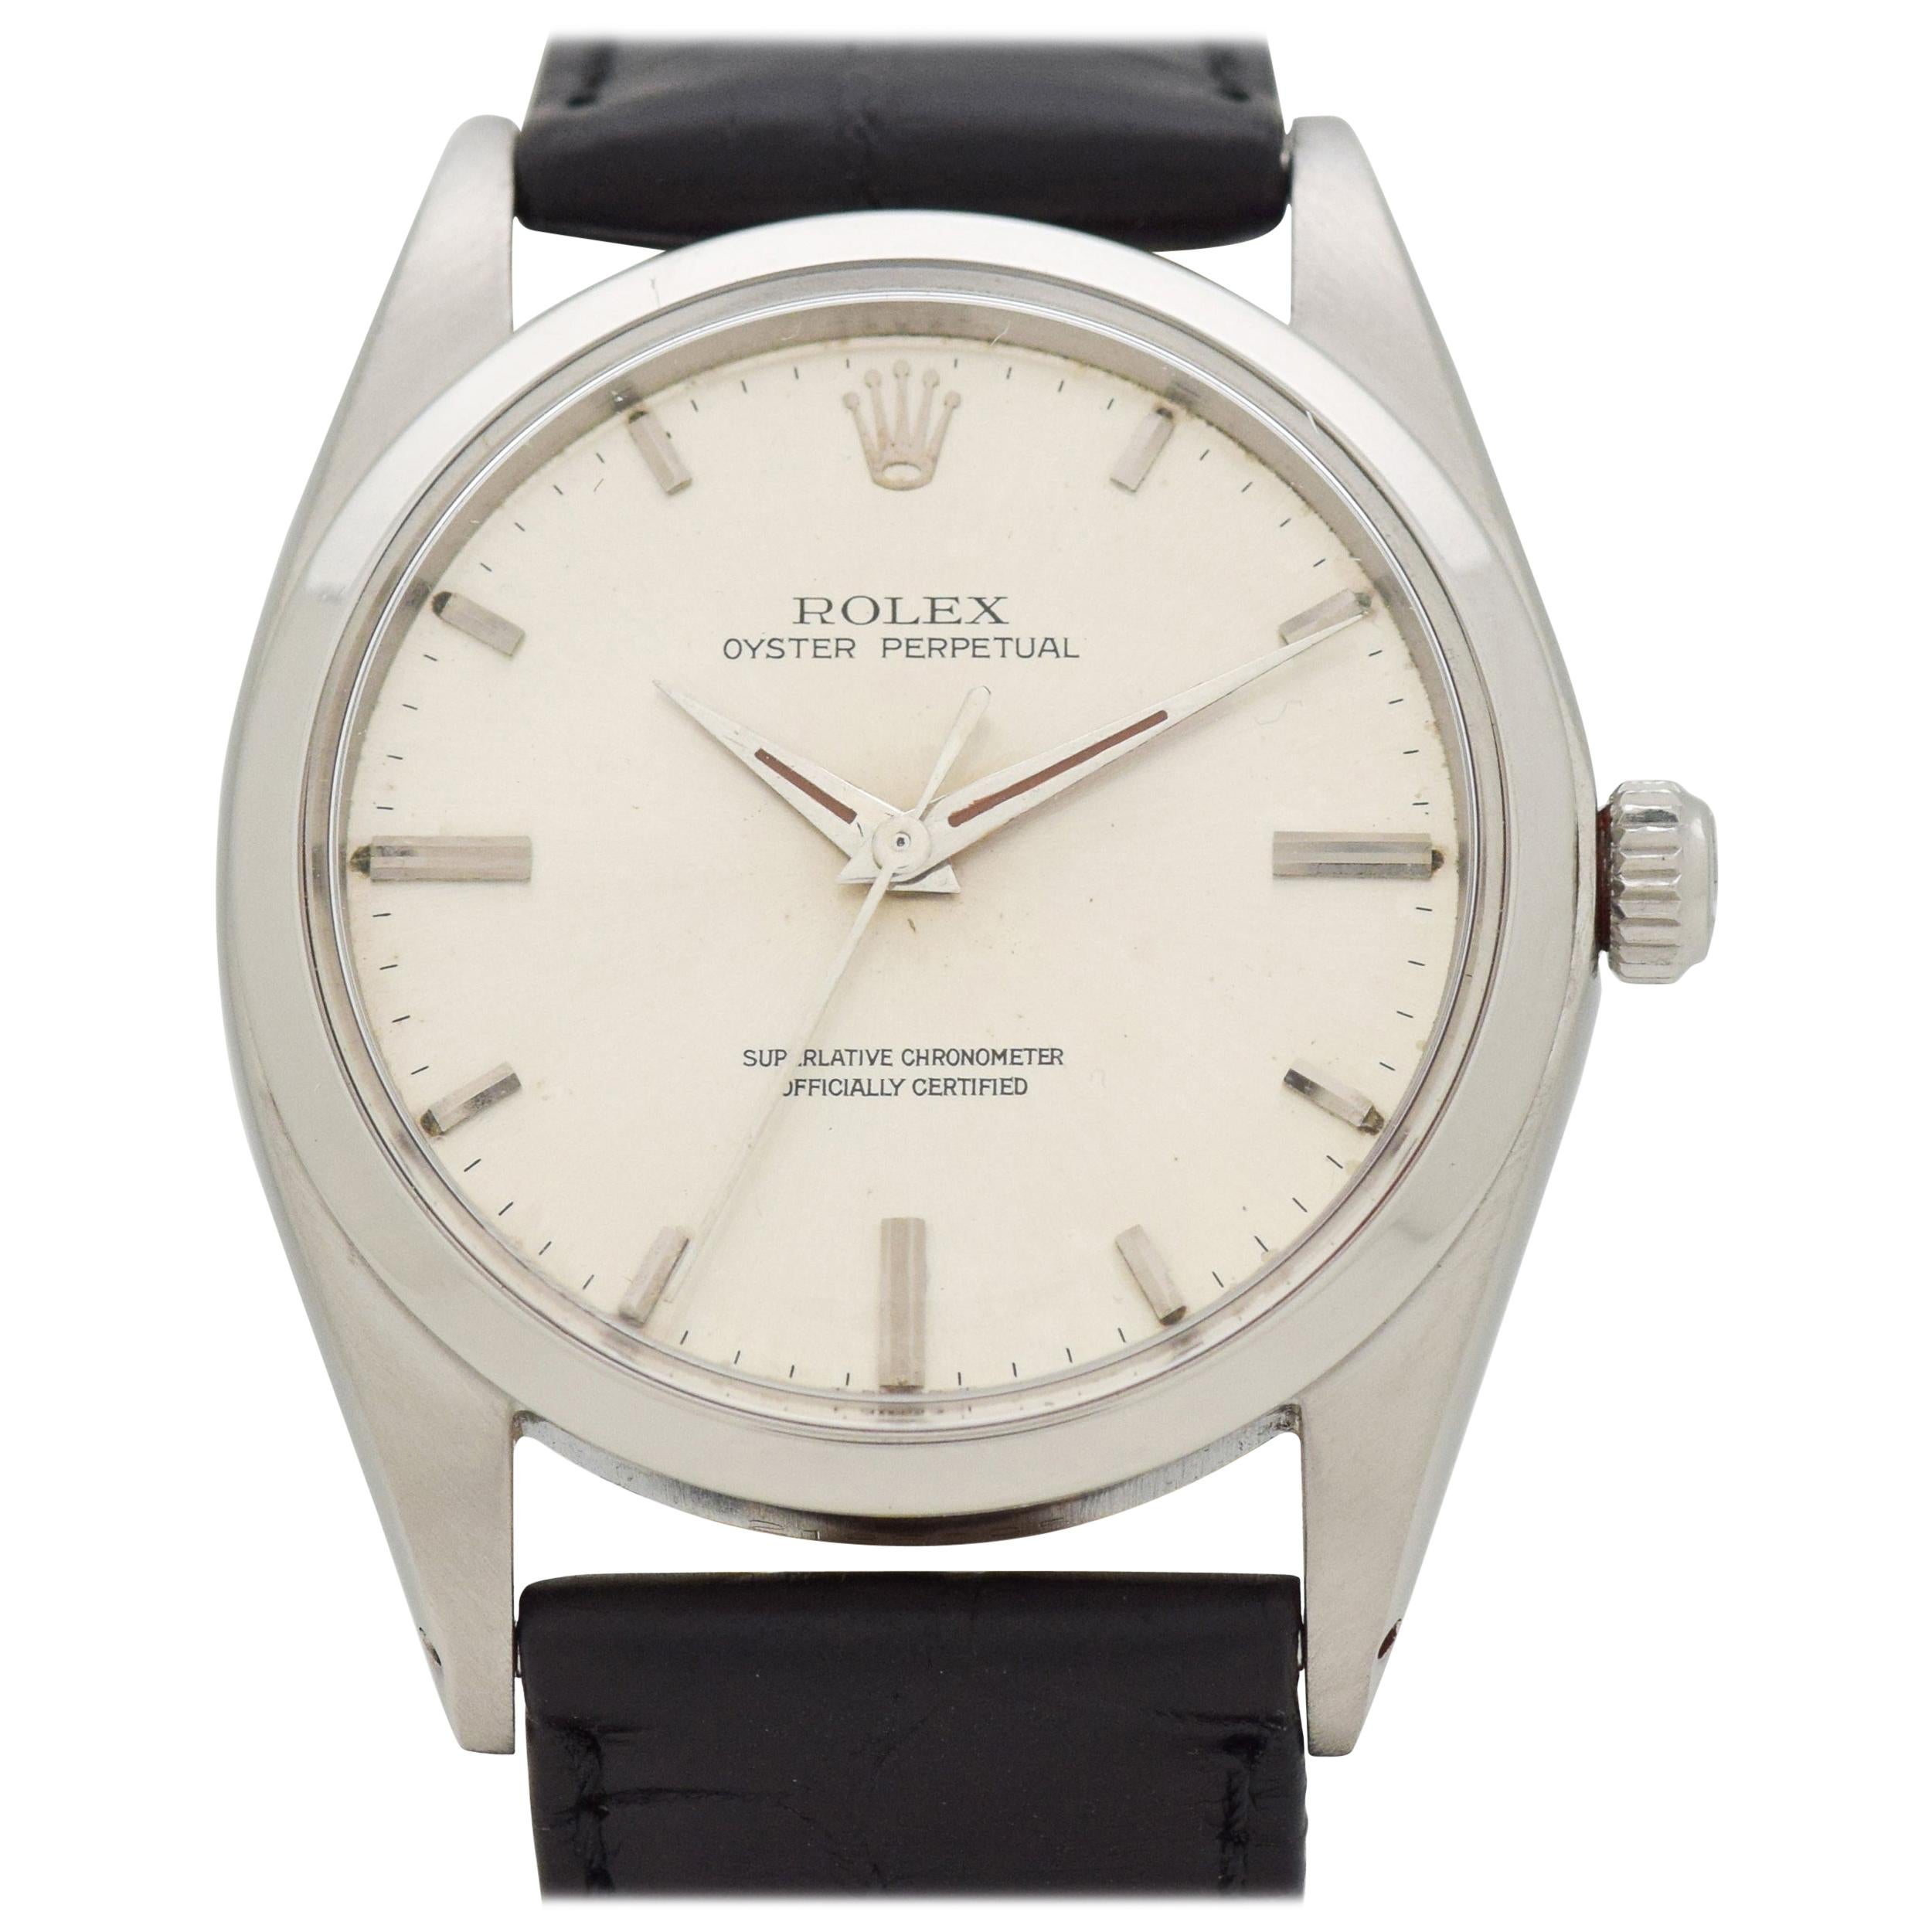 Vintage Rolex Oyster Perpetual Reference 1018 Stainless Steel Watch, 1968